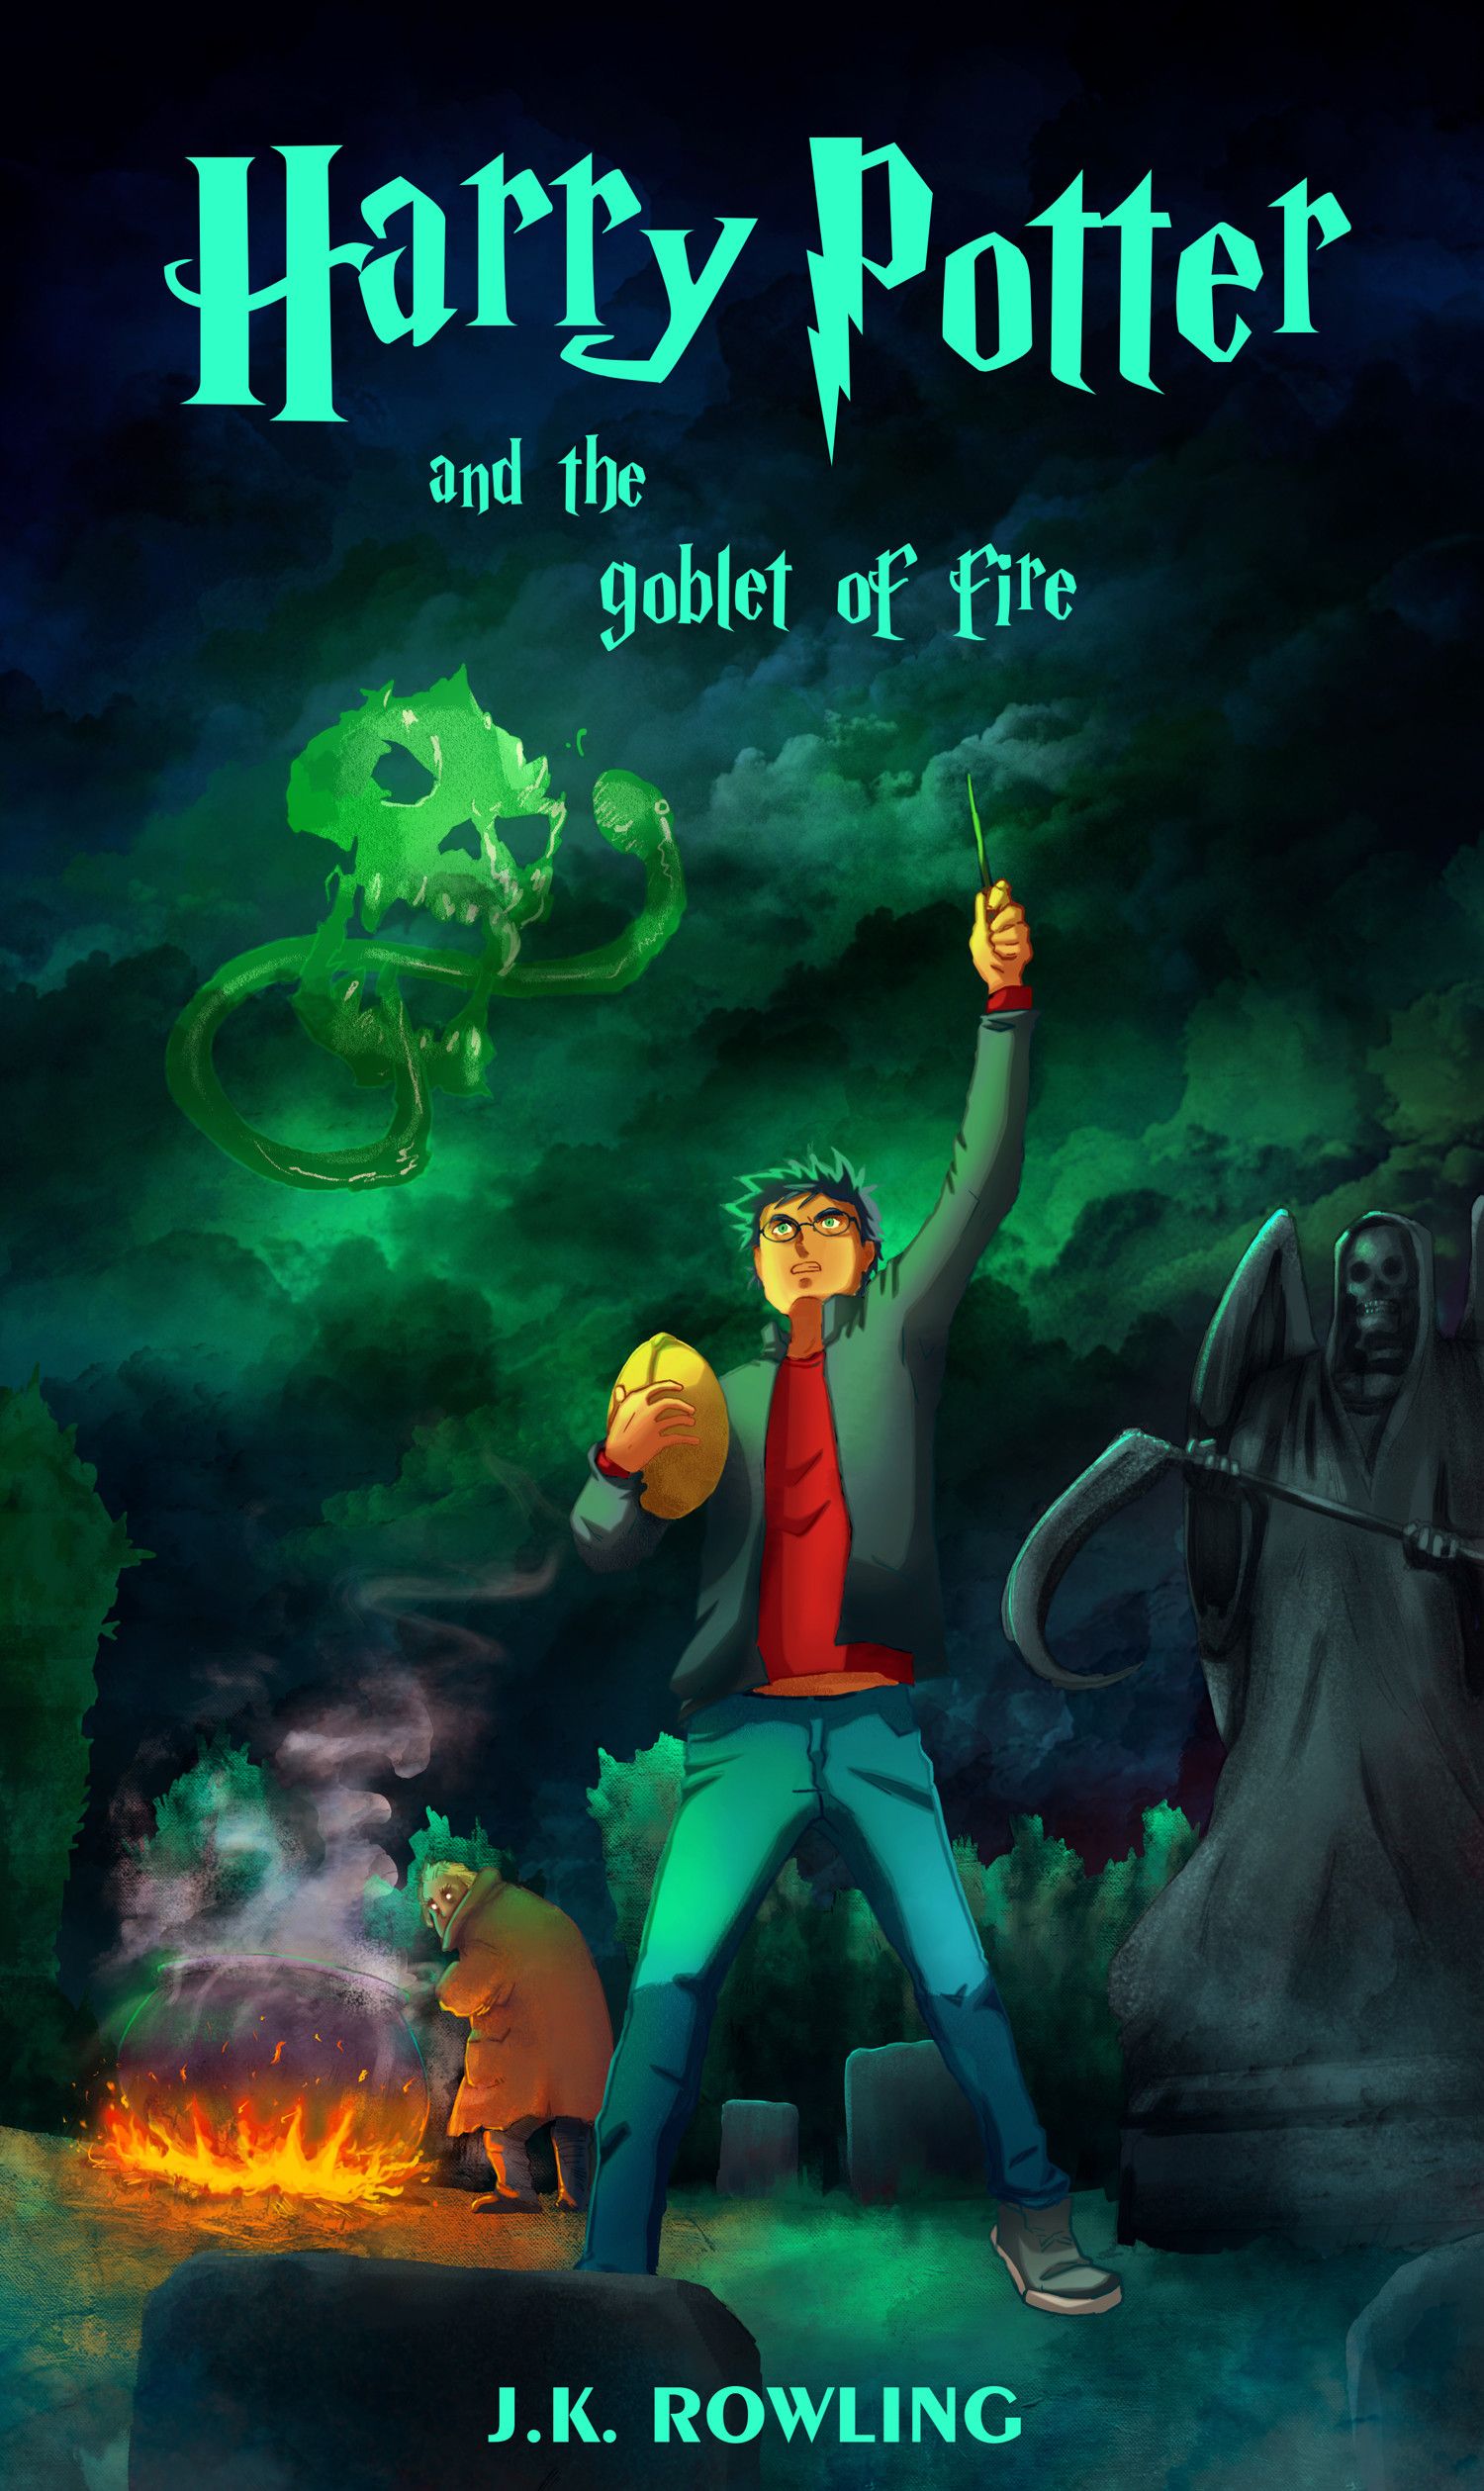 listen to harry potter and the goblet of fire online